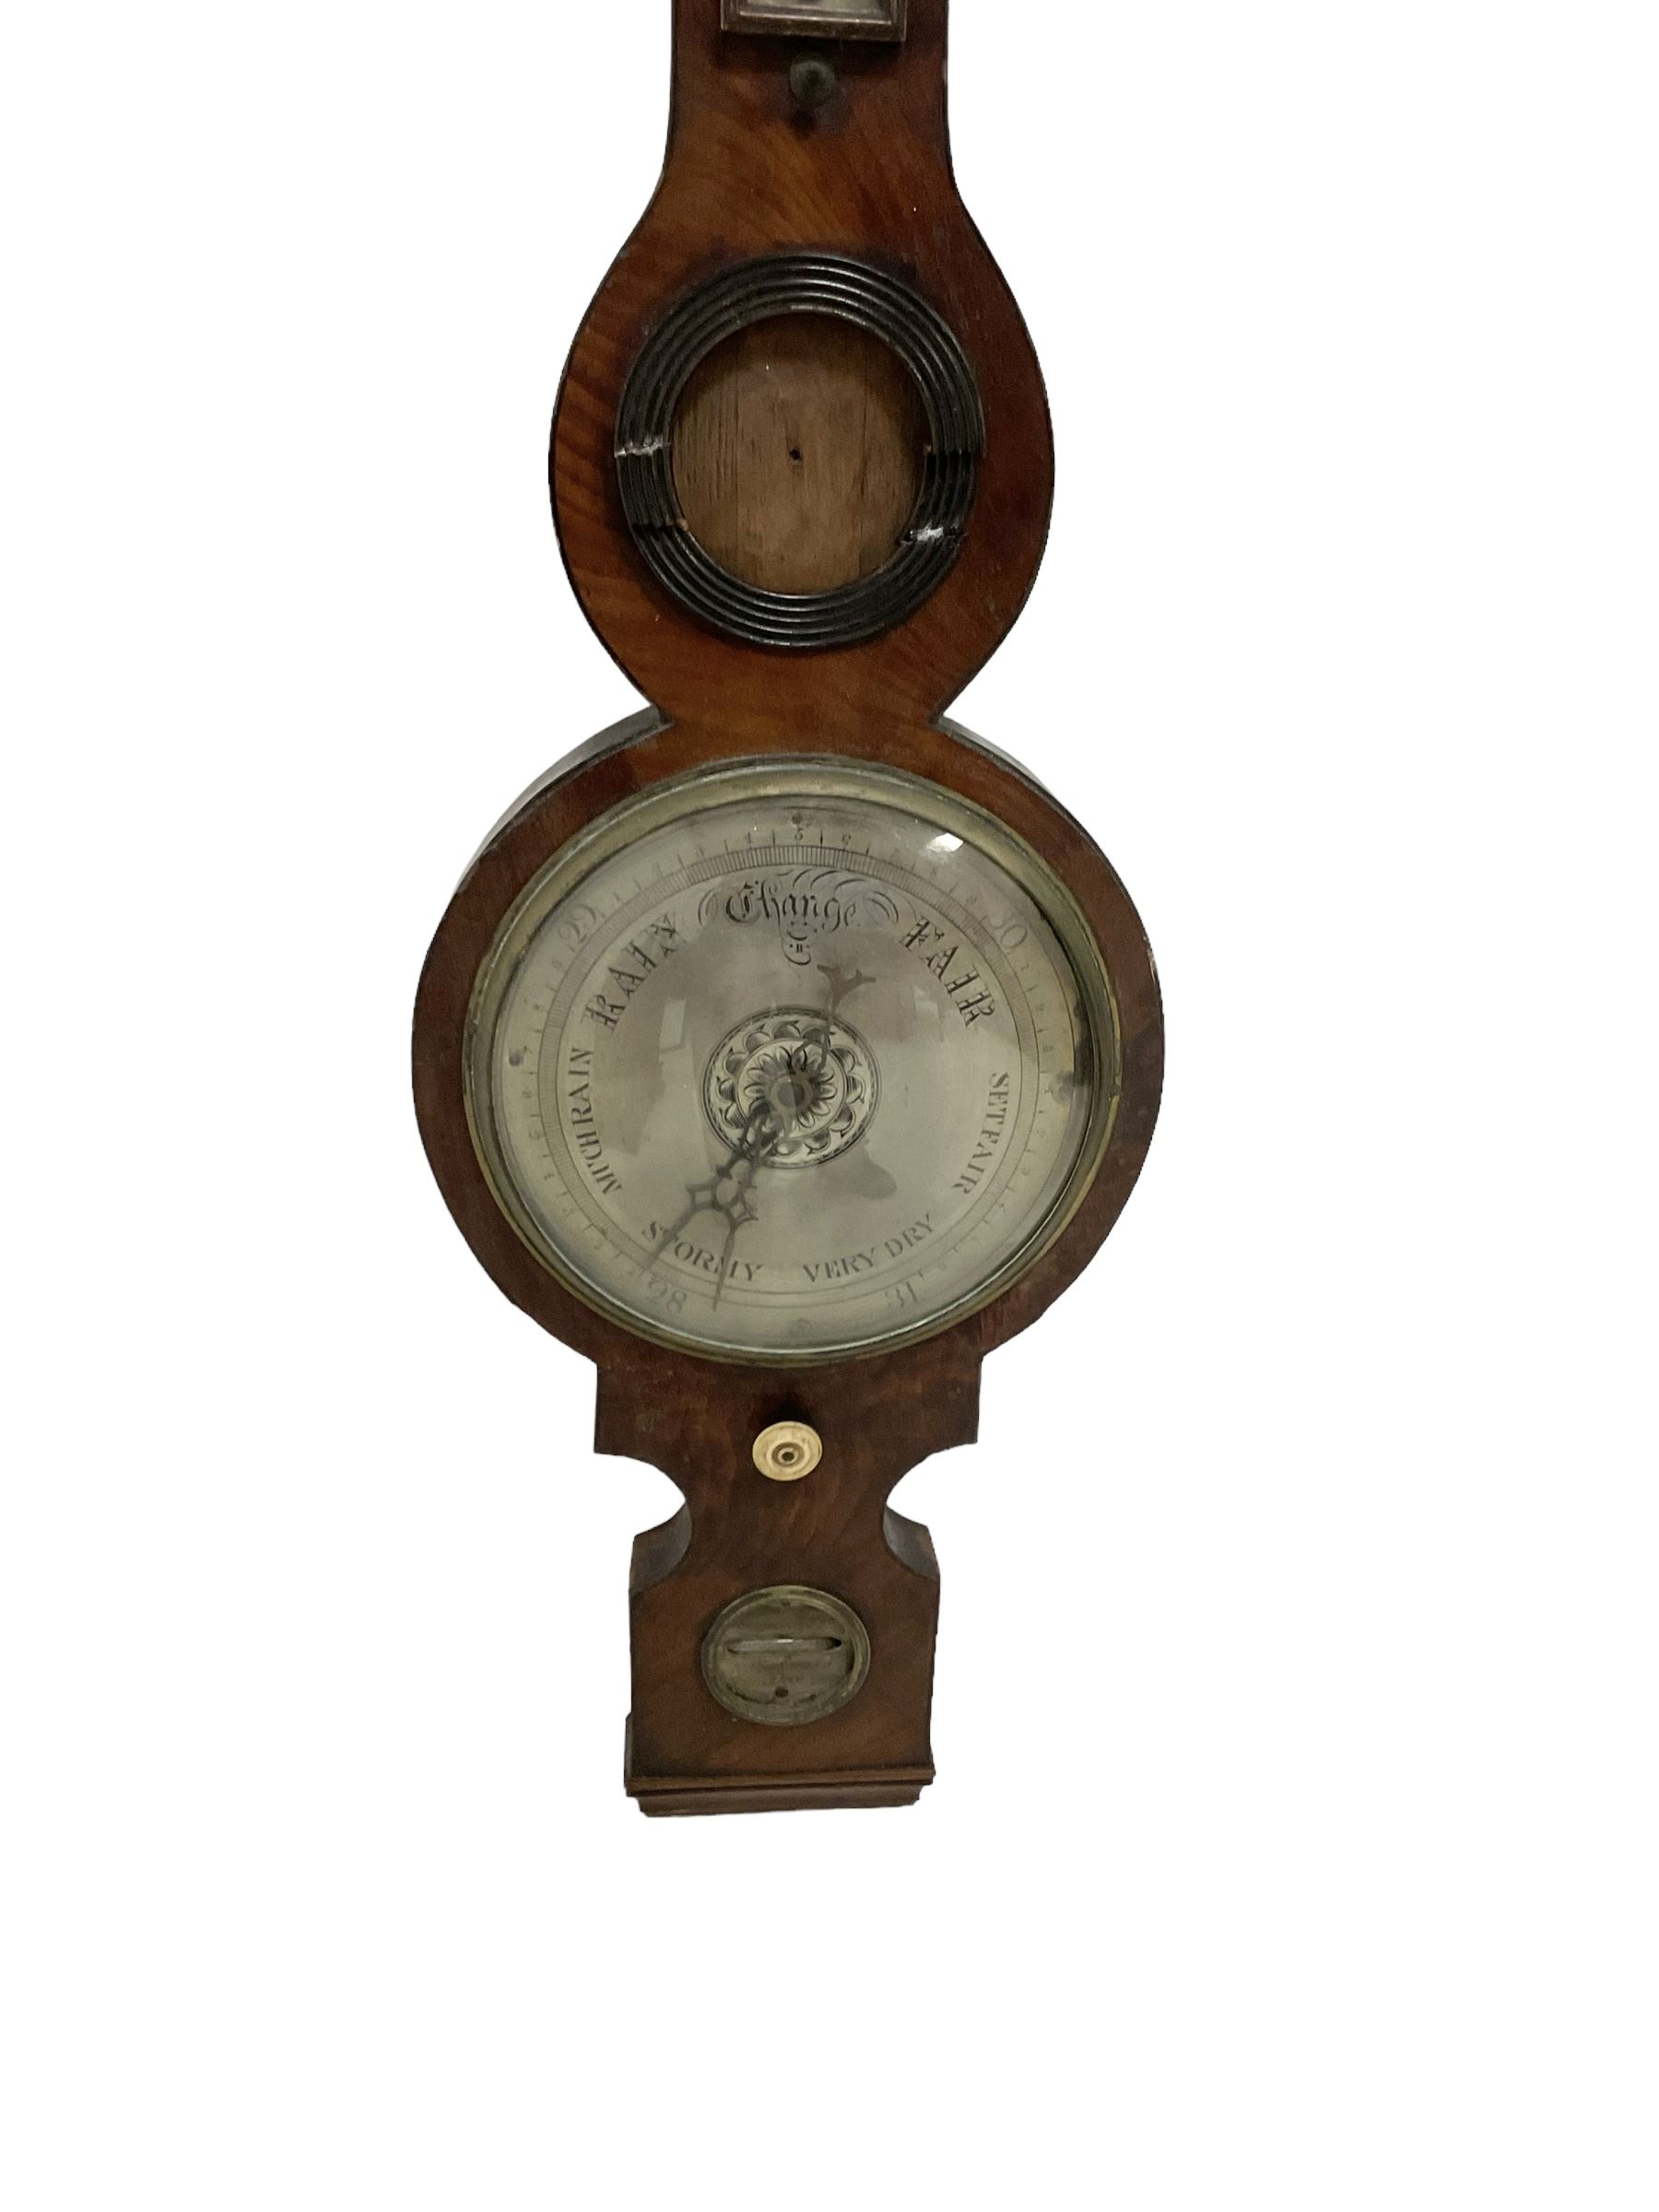 Victorian mercury barometer in a mahogany case - Image 2 of 3